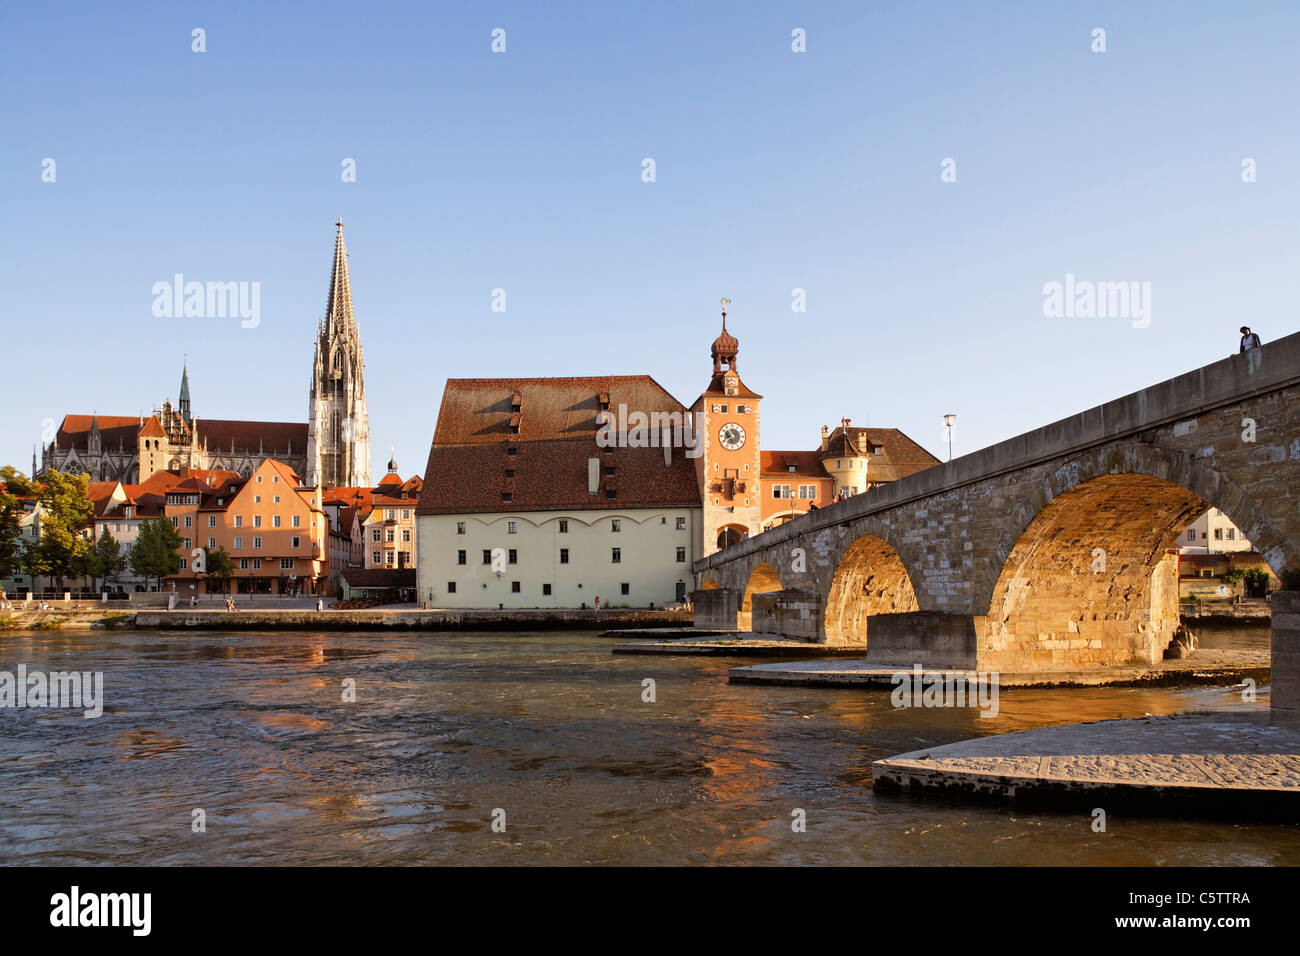 Germany, Bavaria, Upper Palatinate, Regensburg, View of old town with cathedral, stone bridge and Danube river Stock Photo